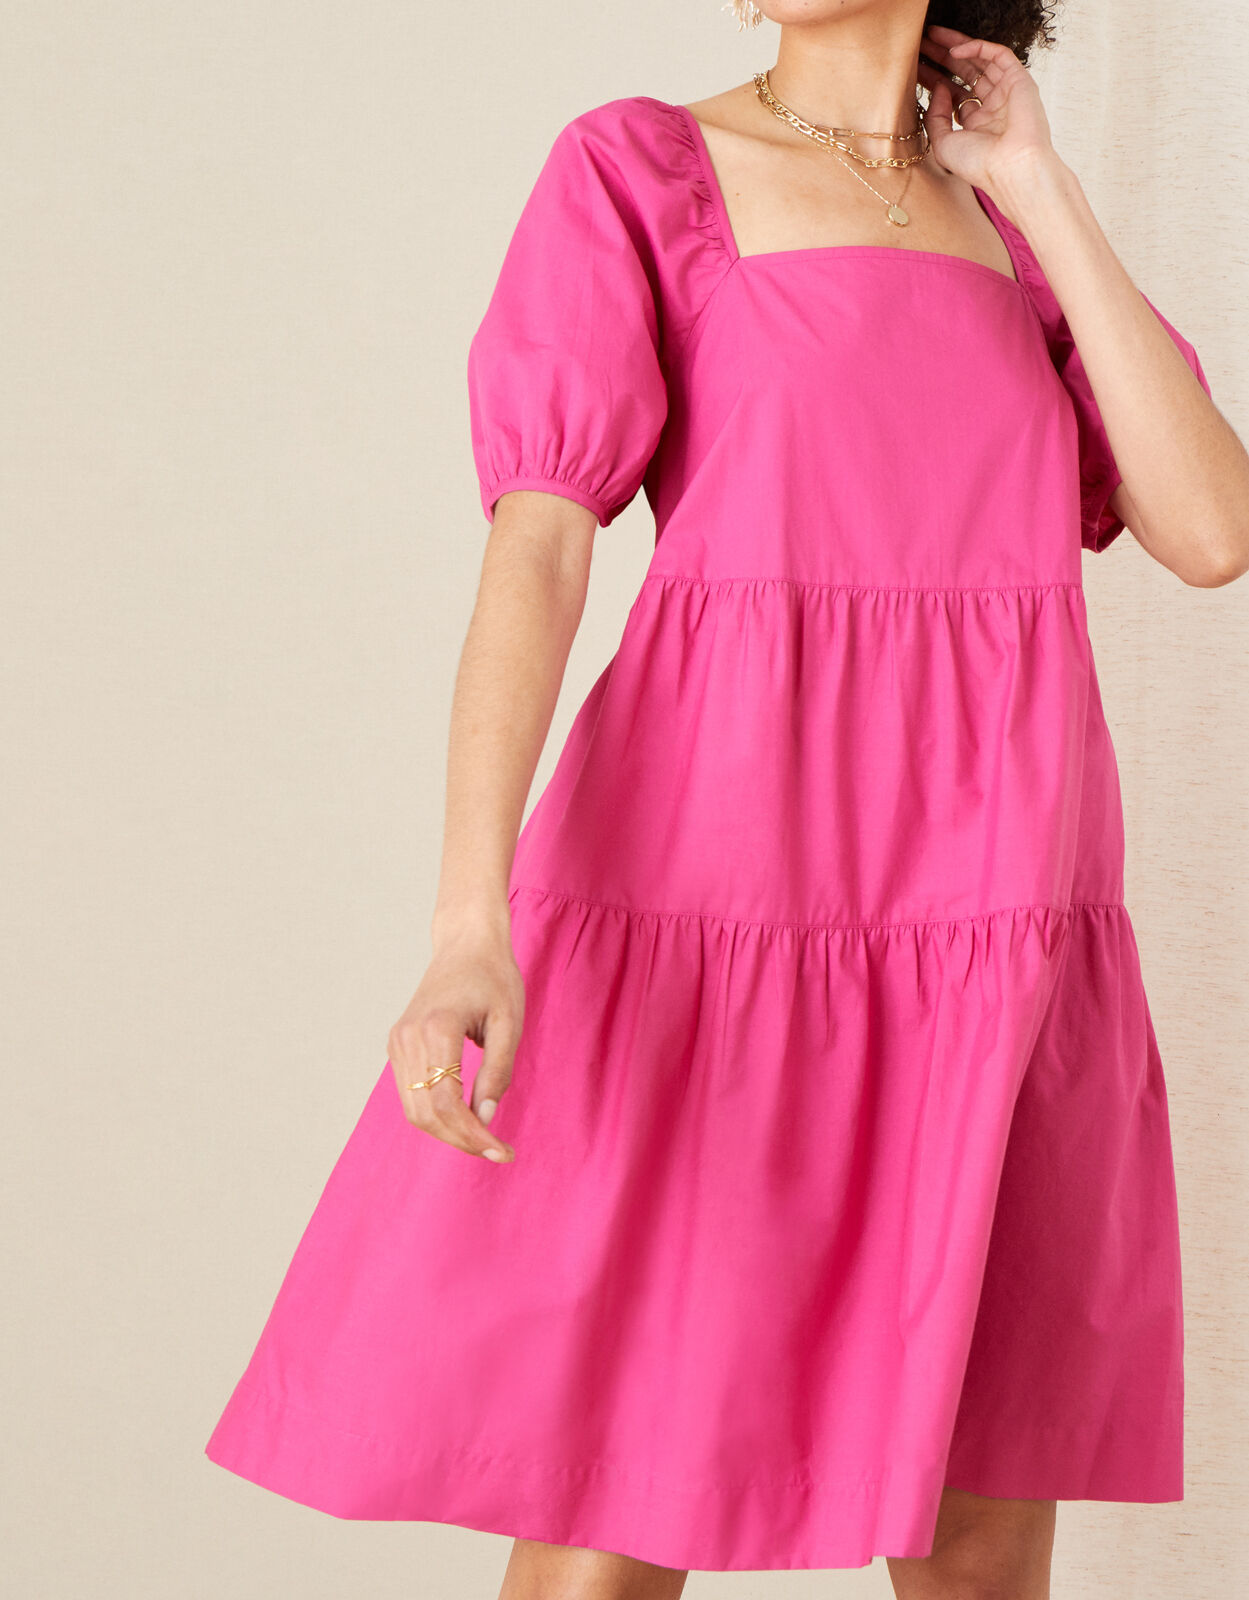 Tiered Dress in Organic Cotton Pink ...